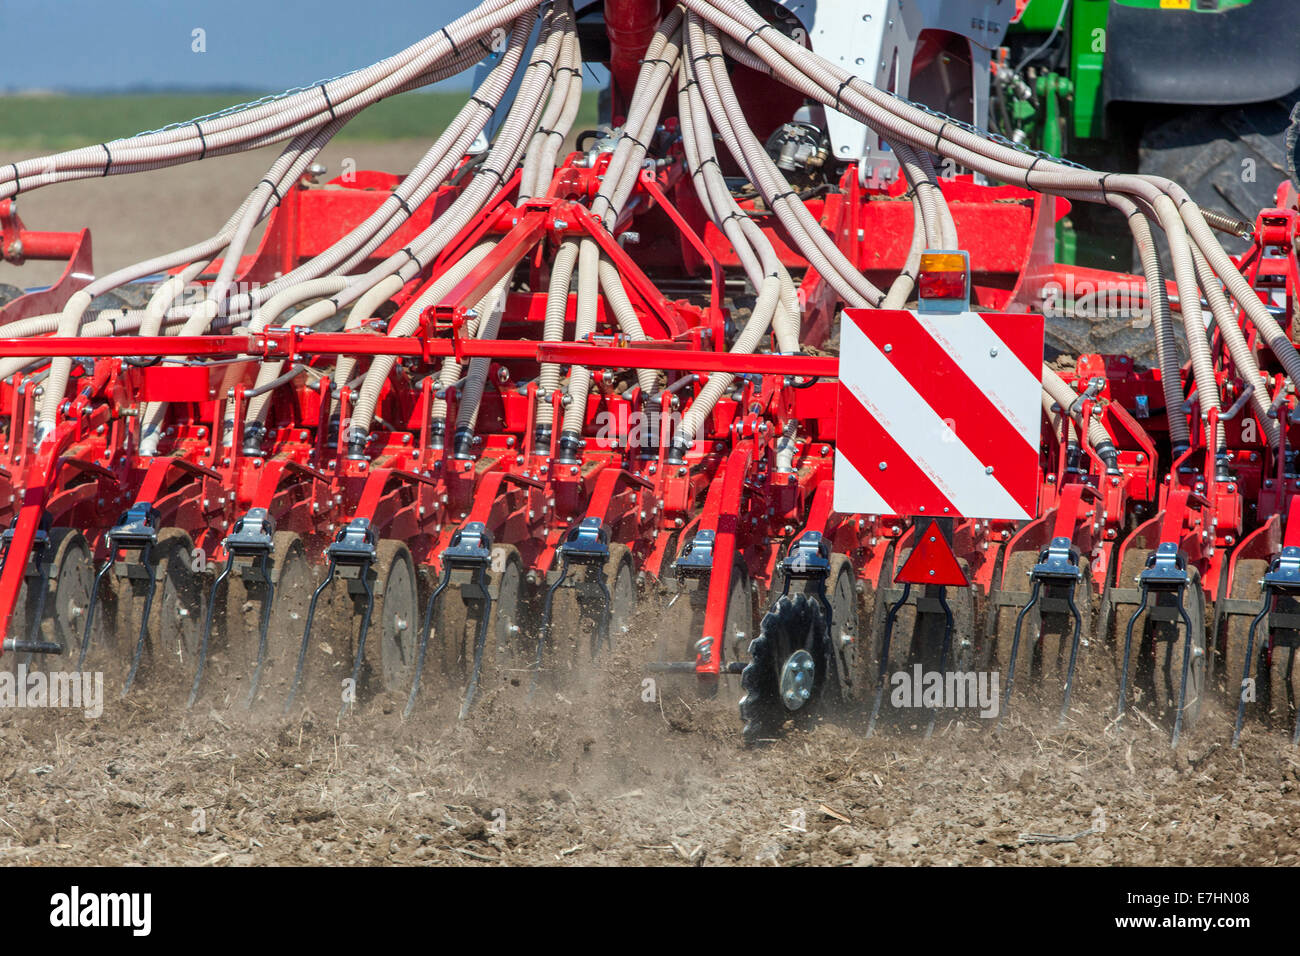 Seed Drill Pottinger, sowing seeds, wheat grain on a field, sowing machine Czech Republic agriculture Stock Photo